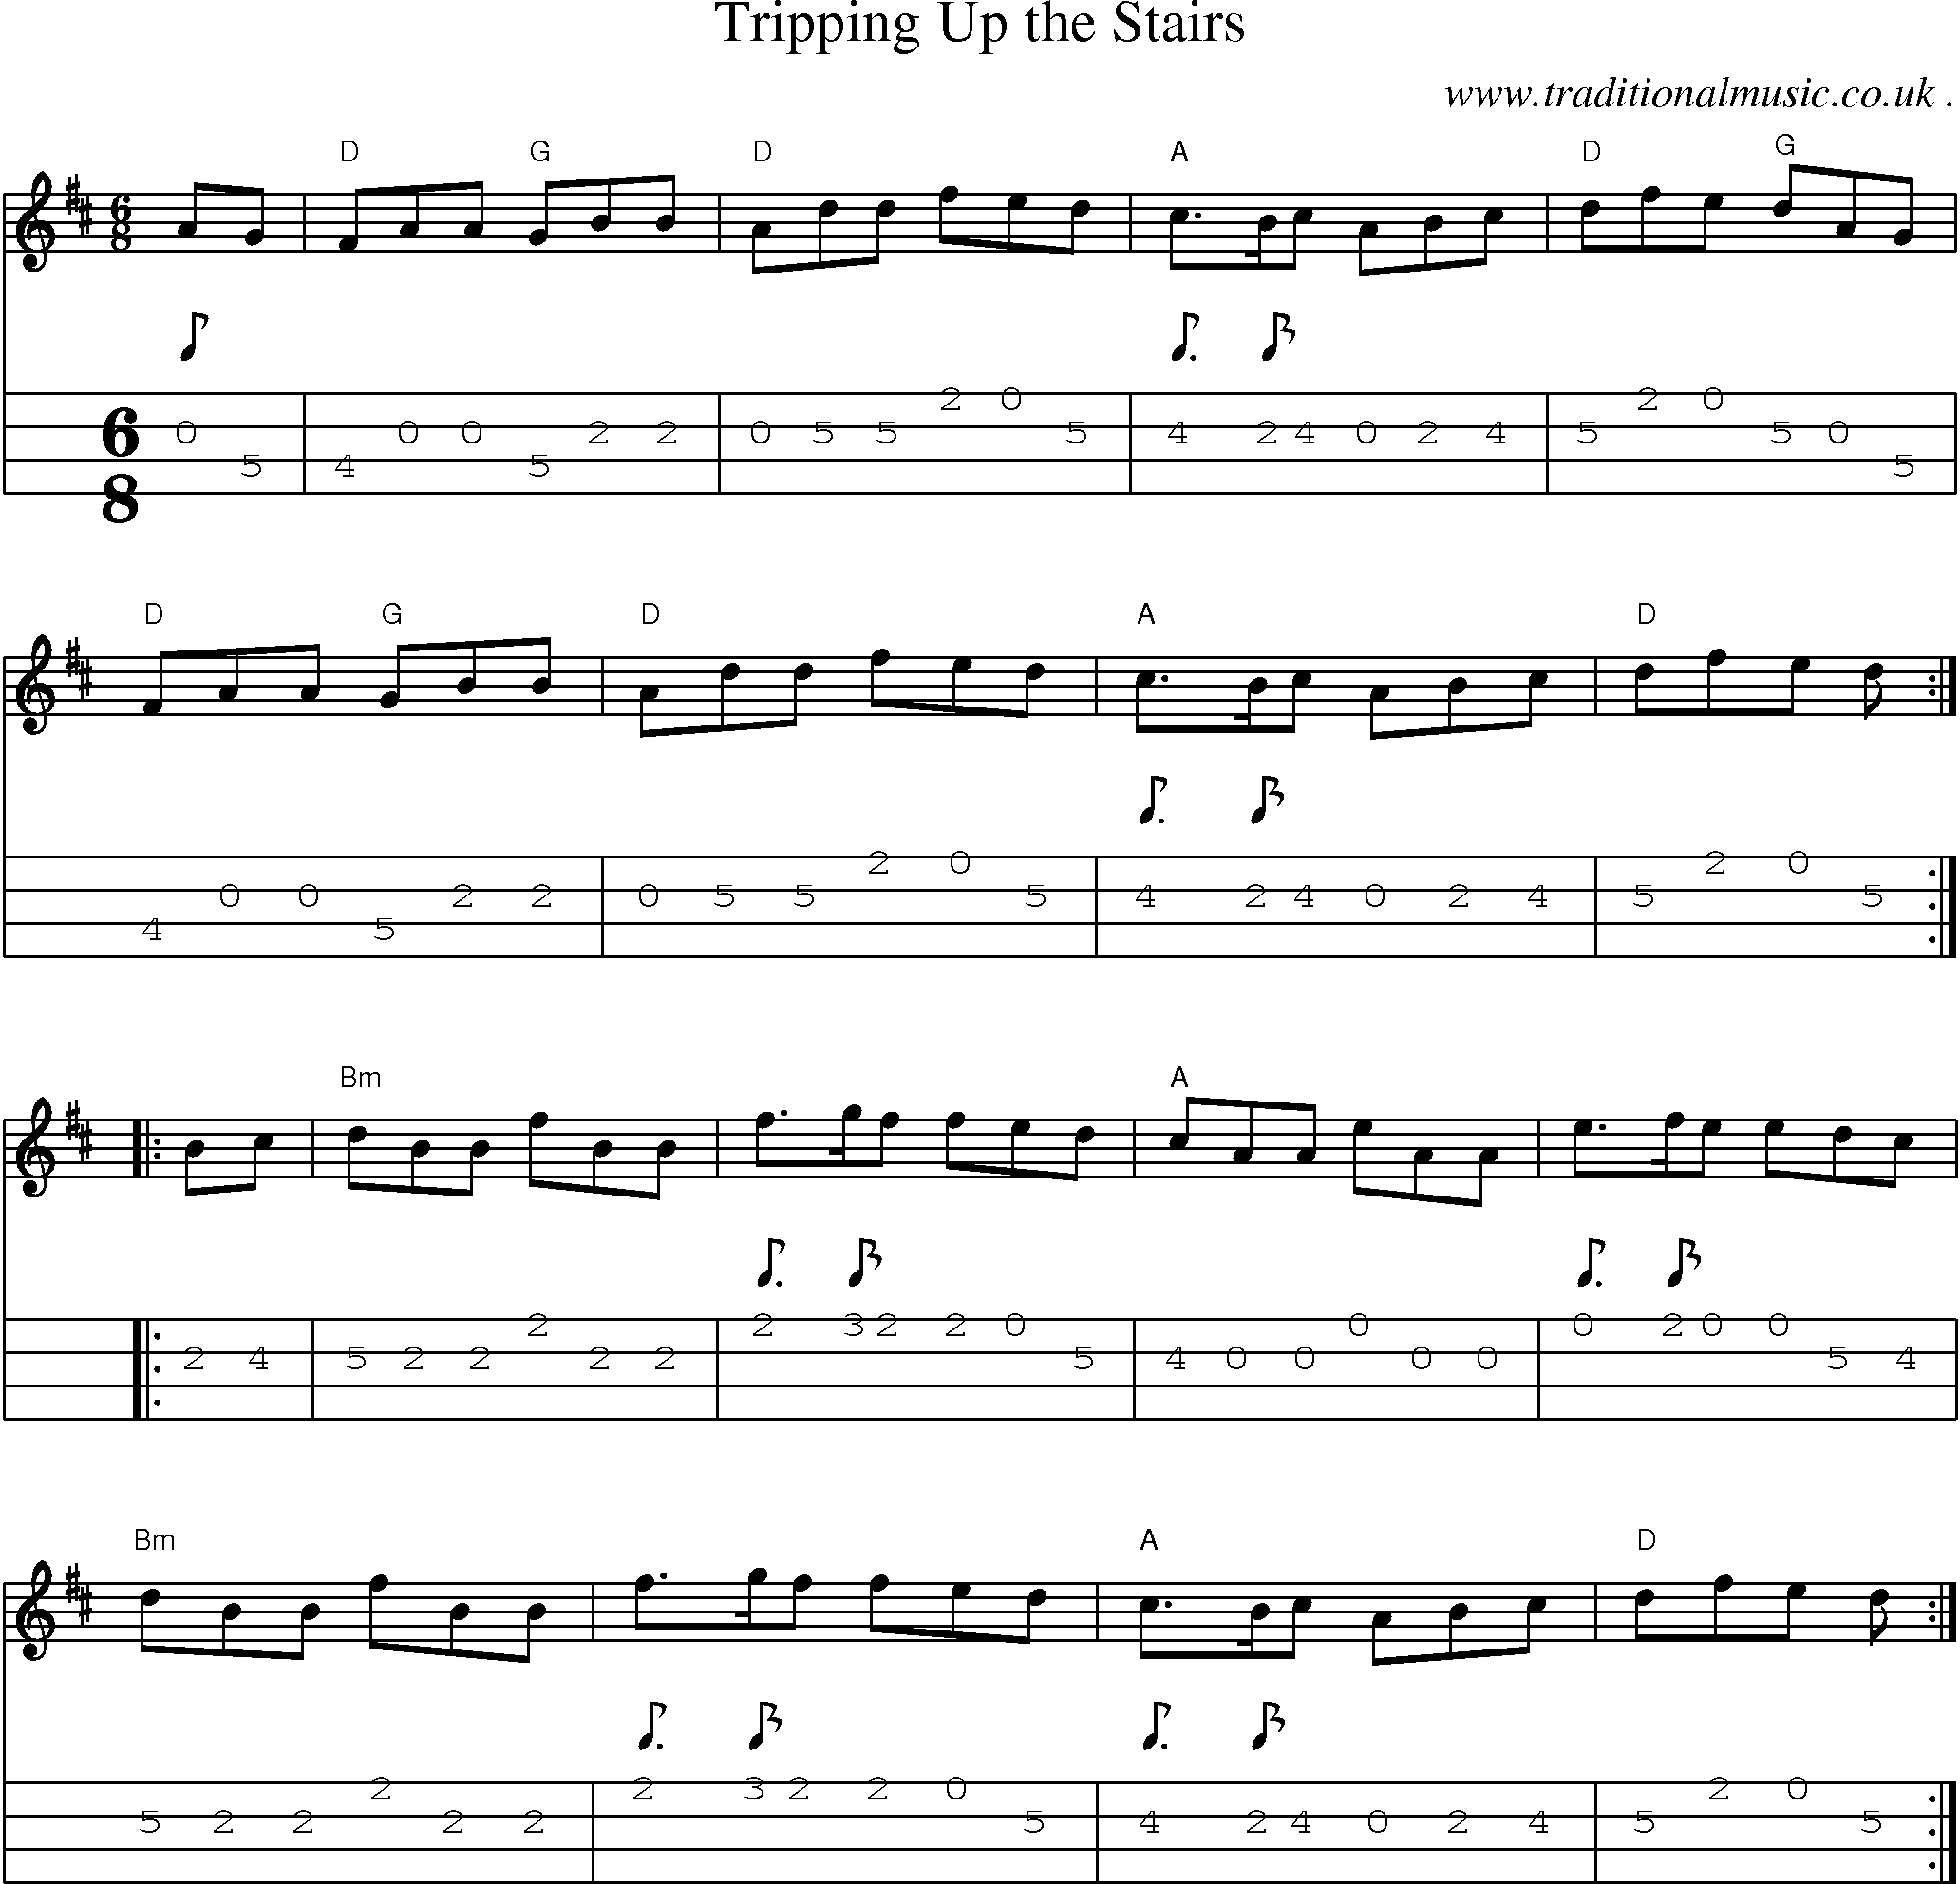 Music Score and Guitar Tabs for Tripping Up The Stairs